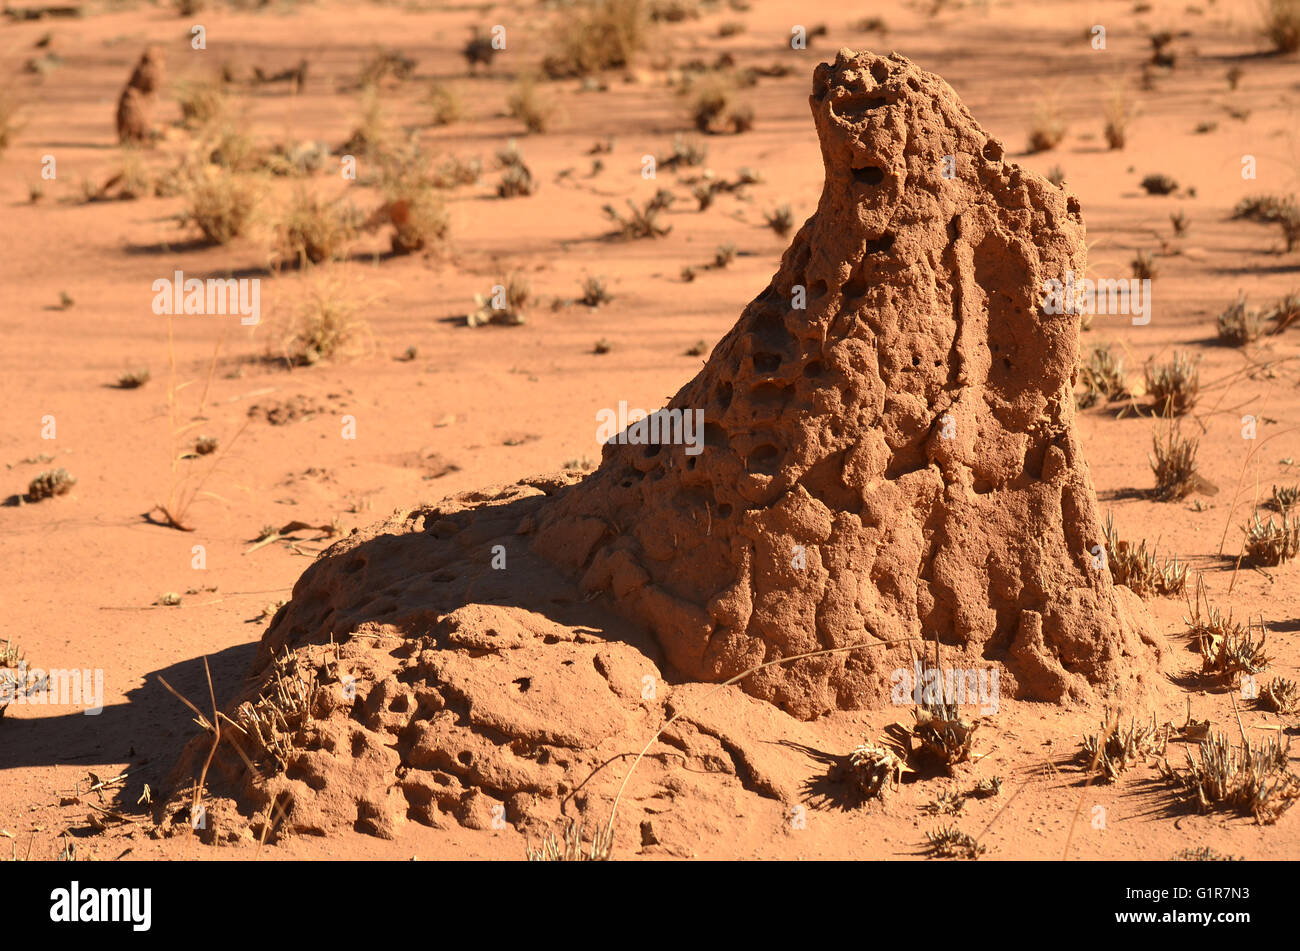 Odd pyramid shaped termite mound built from red soil in outback Australia Stock Photo